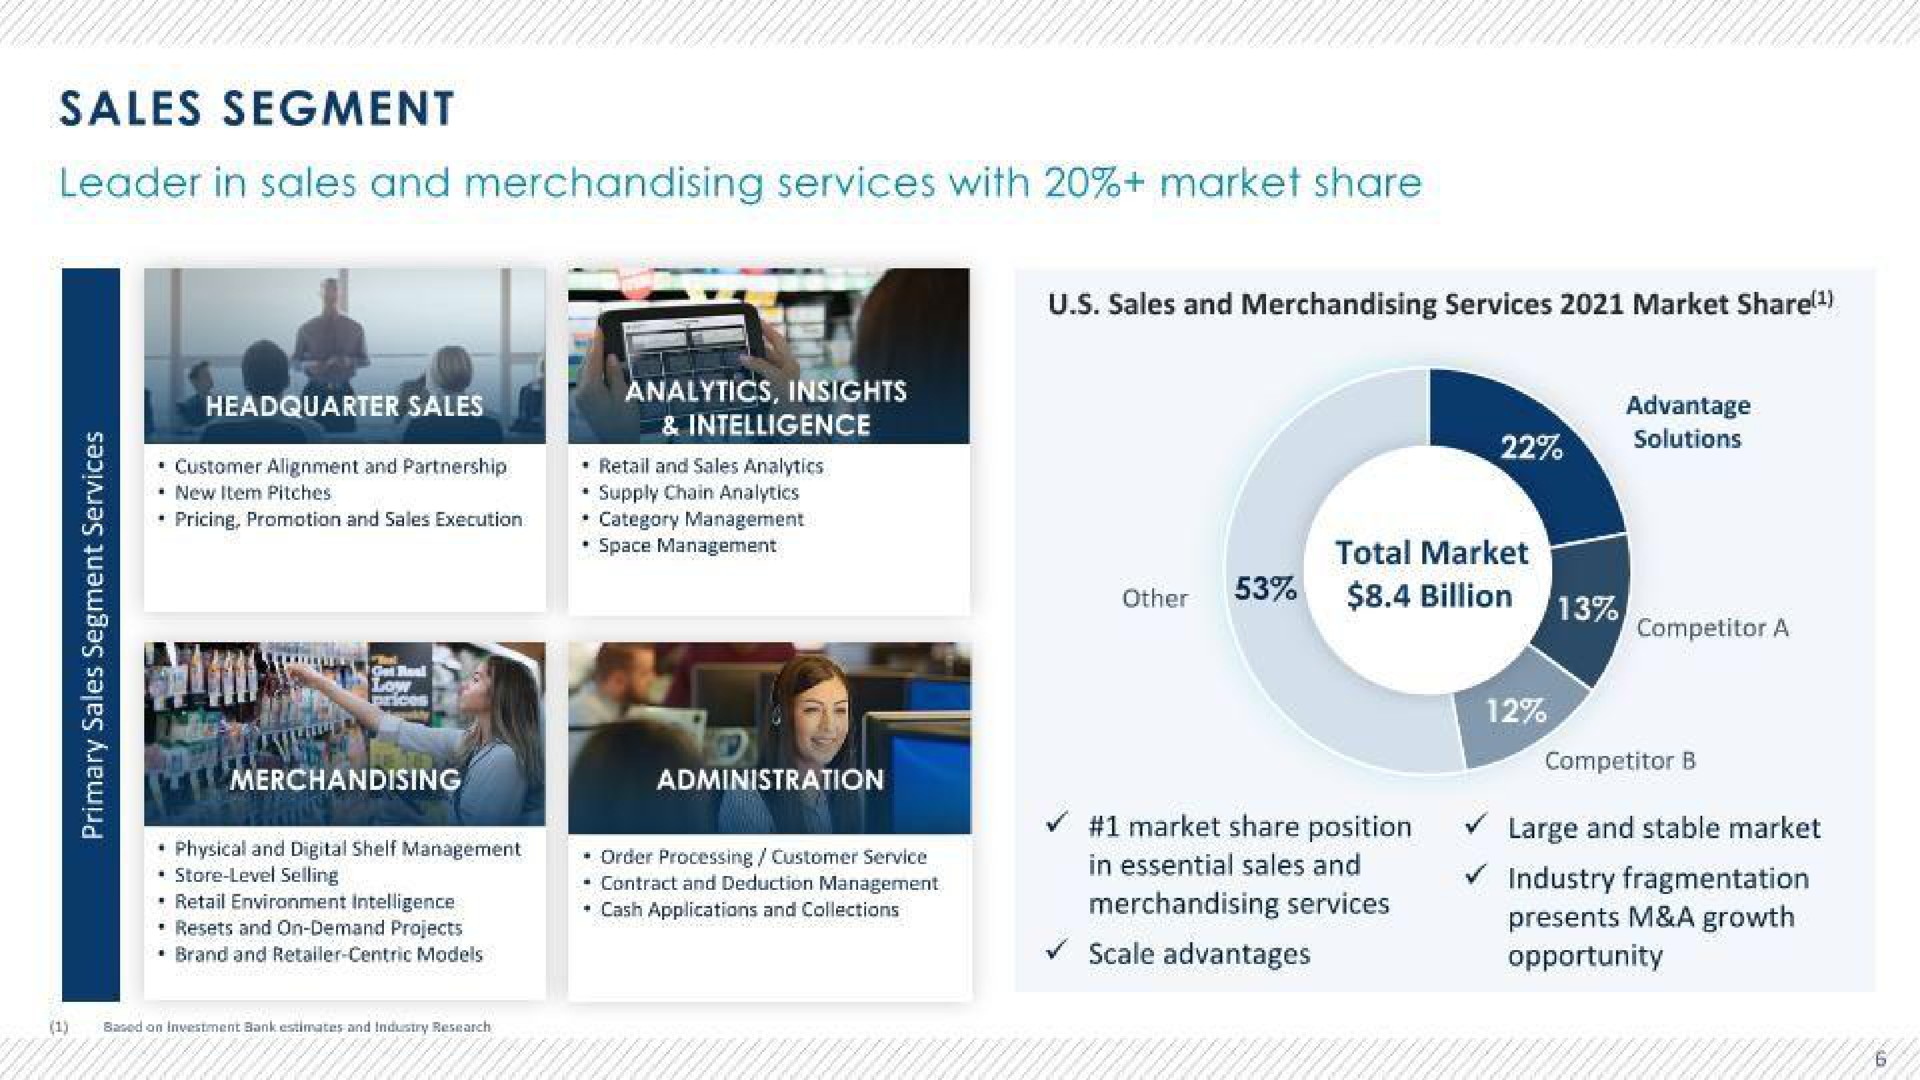 sales segment leader in sales and merchandising services with market share other billion headquarter sales a a merchandising administration | Advantage Solutions